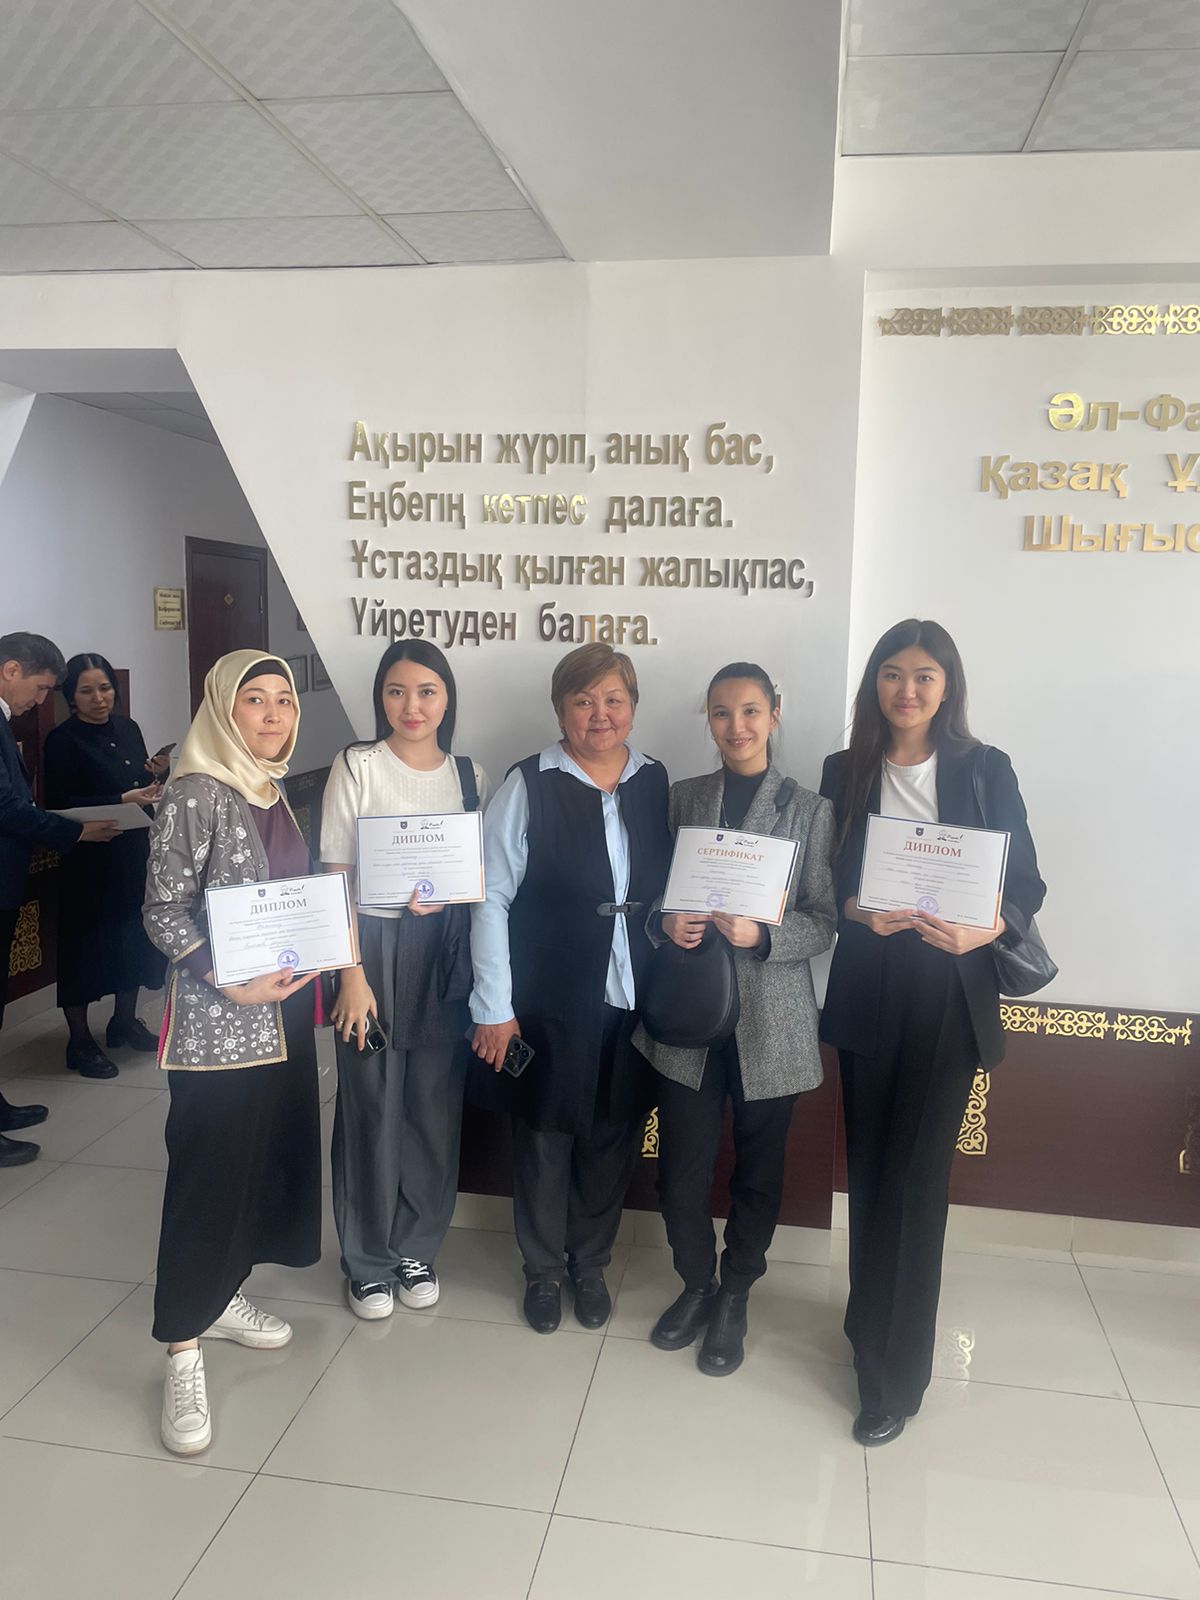 Winners of the event "Фараби әлемi" 2024 (Farabi world), within the framework of sustainable development goals. Students from the Middle East and South Asia Department.